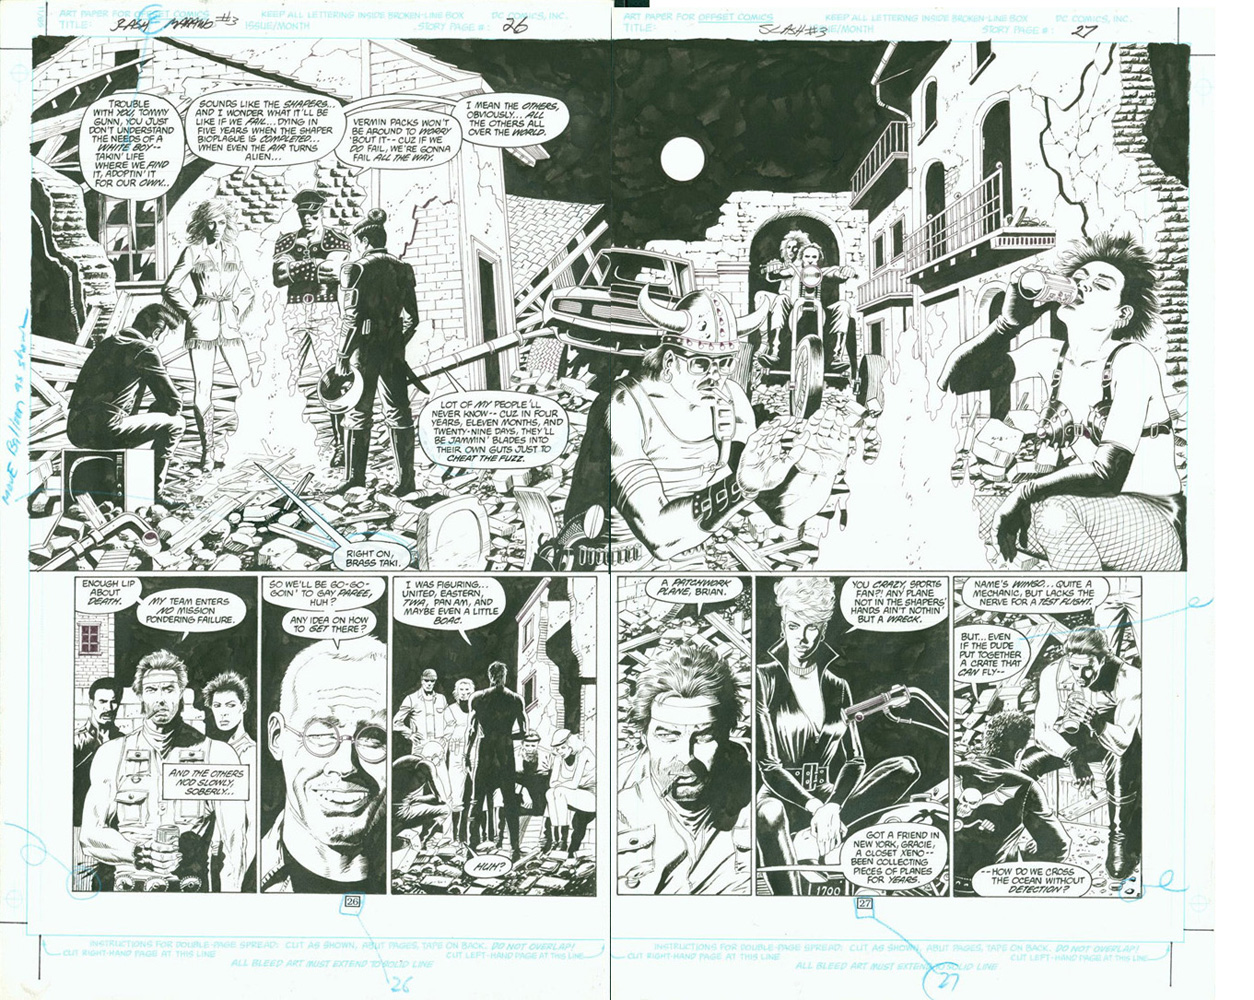 Slash Maraud issue #3, pages 26 and 27, black and white